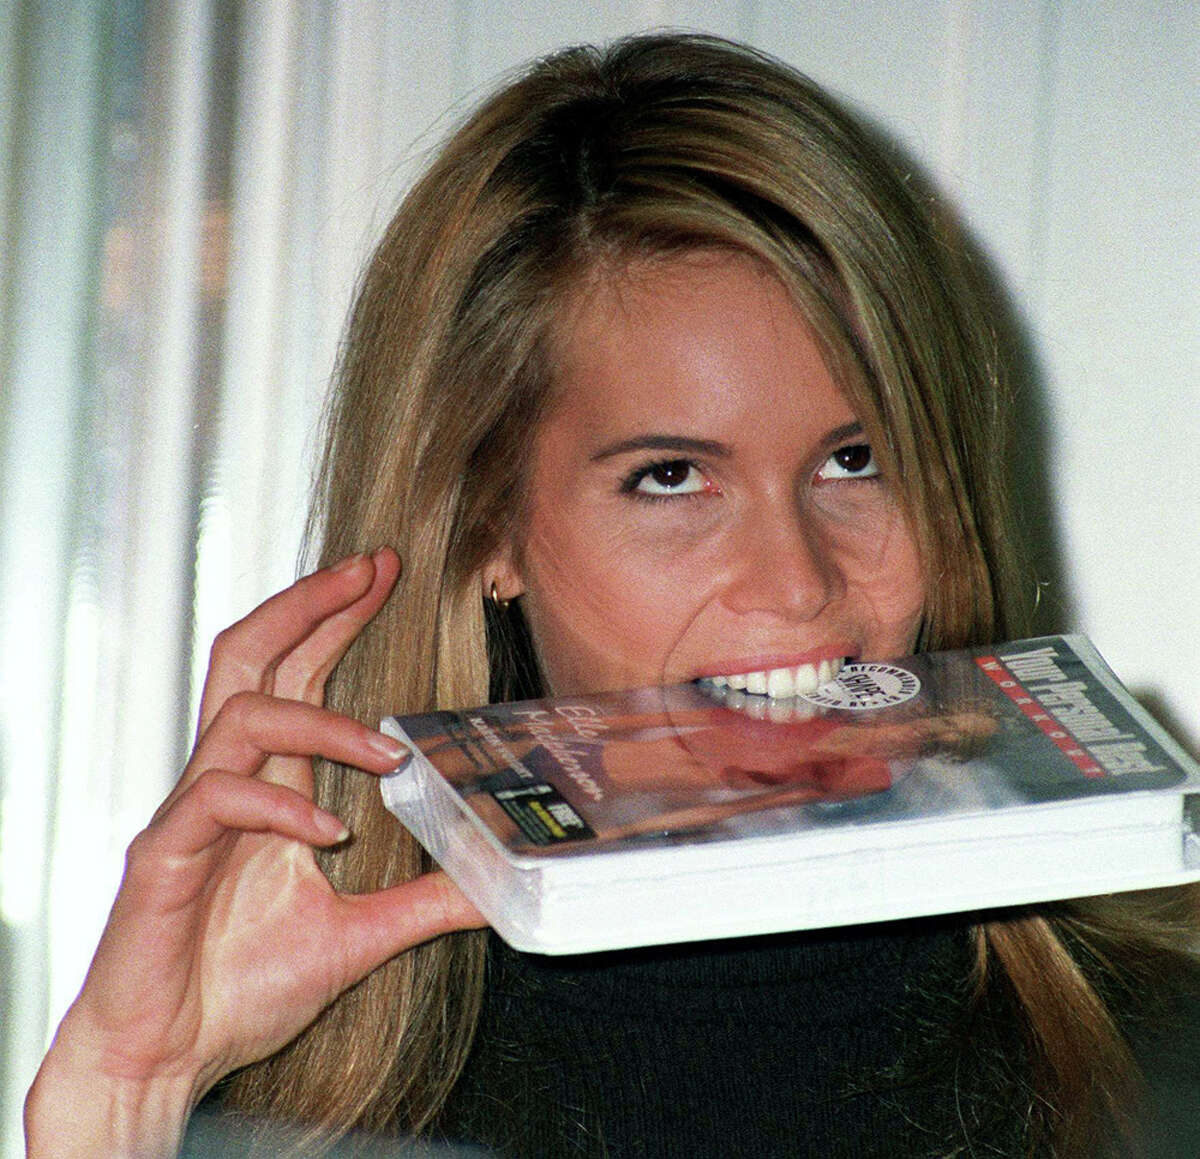 Elle has the right idea: maybe our old tapes can be used as a food source.PHOTO: Australian supermodel Elle Macpherson biting on a VHS copy of her fitness video "Your Personal Best," circa 1995.